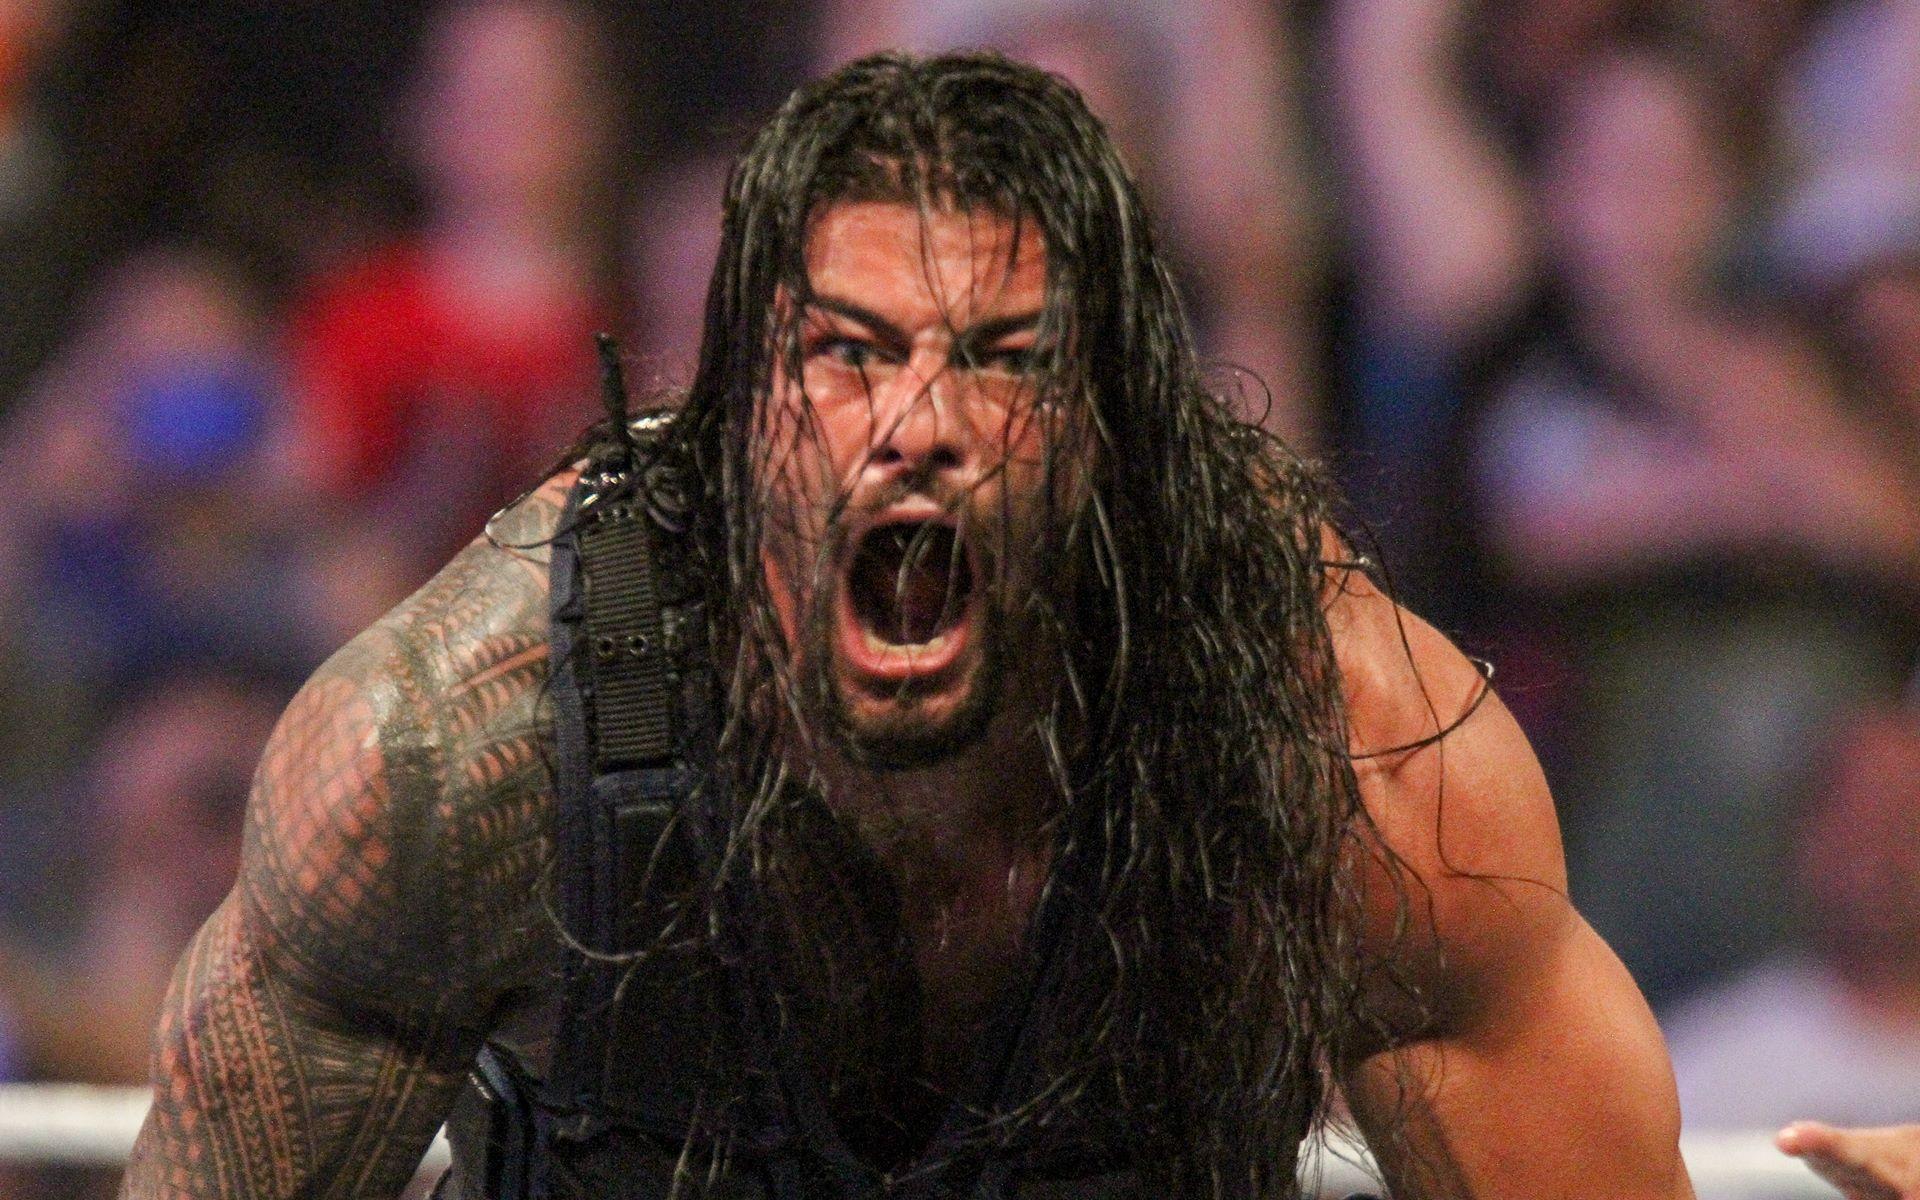 Angry roman reigns